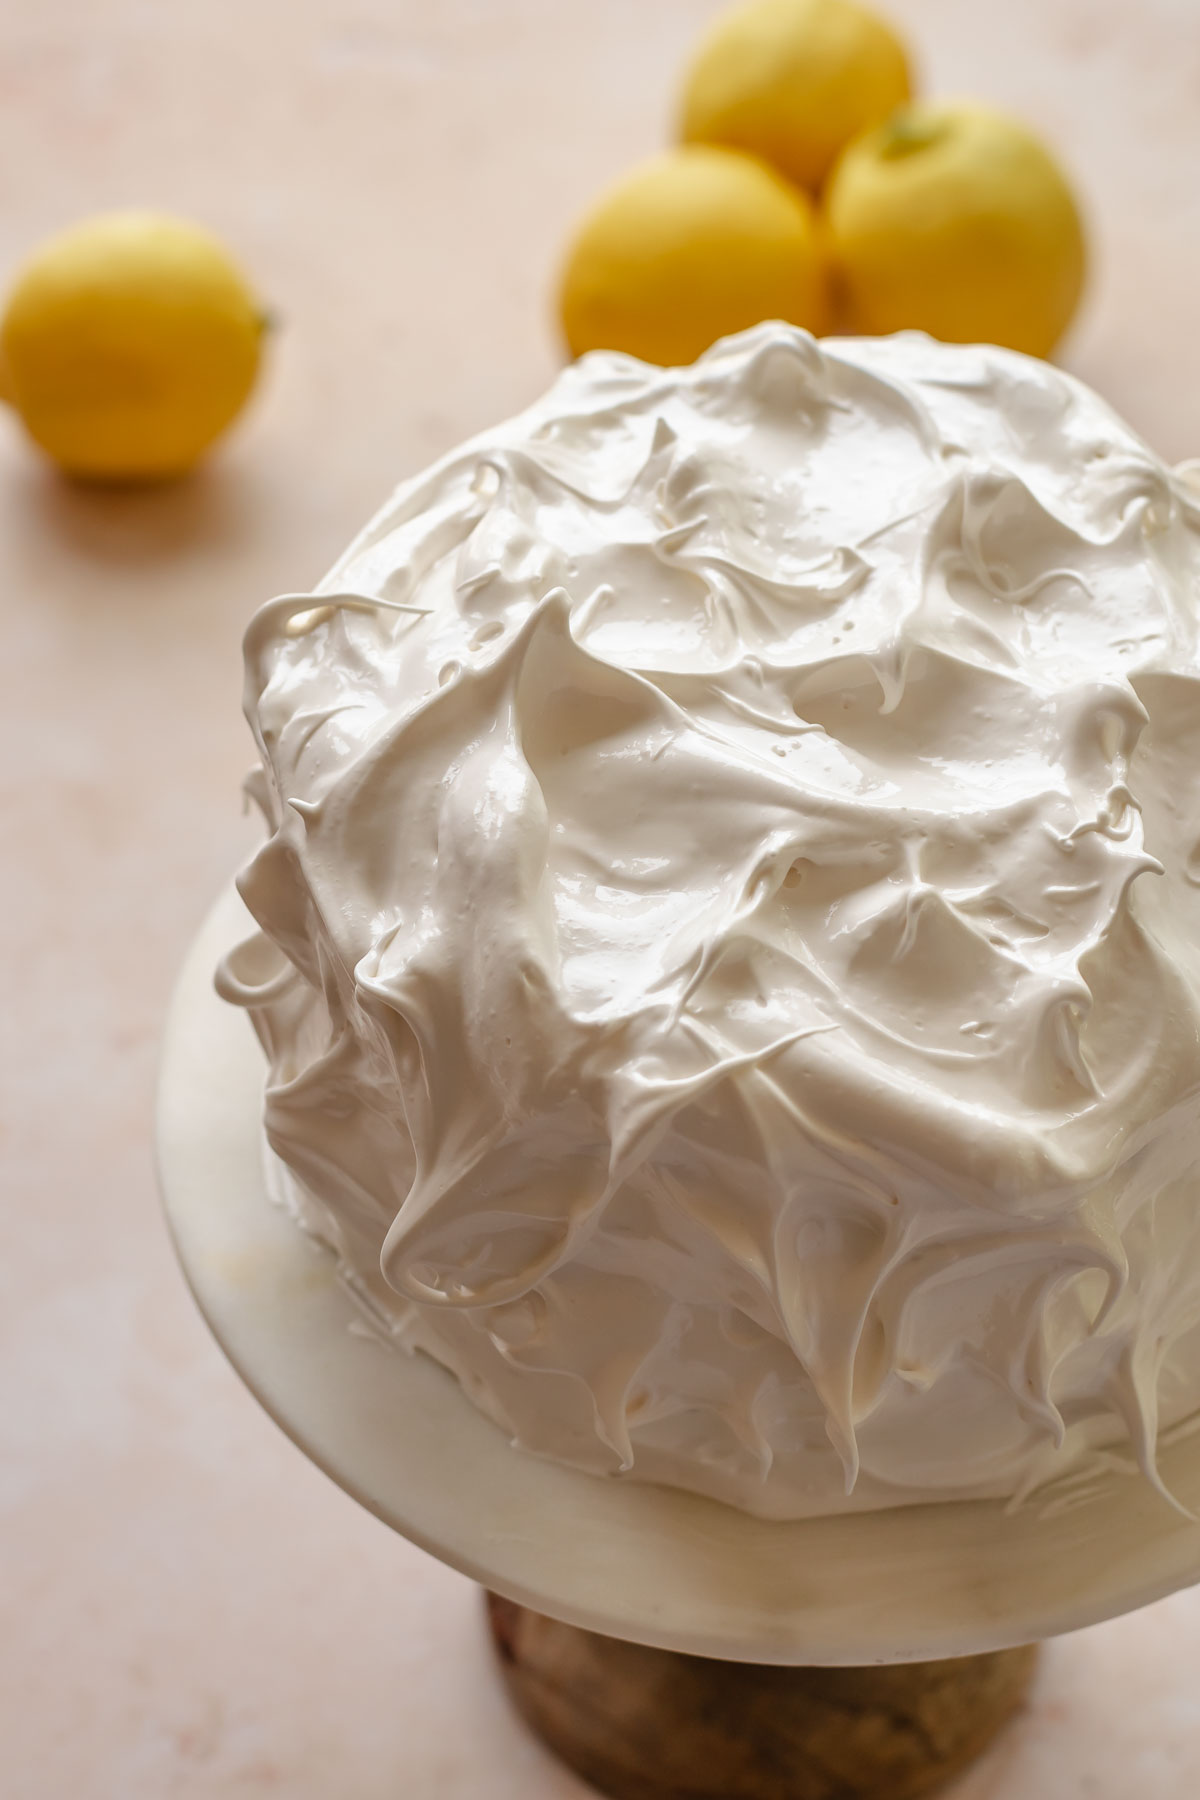 Swiss meringue covered cake with peaks on a cake stand.